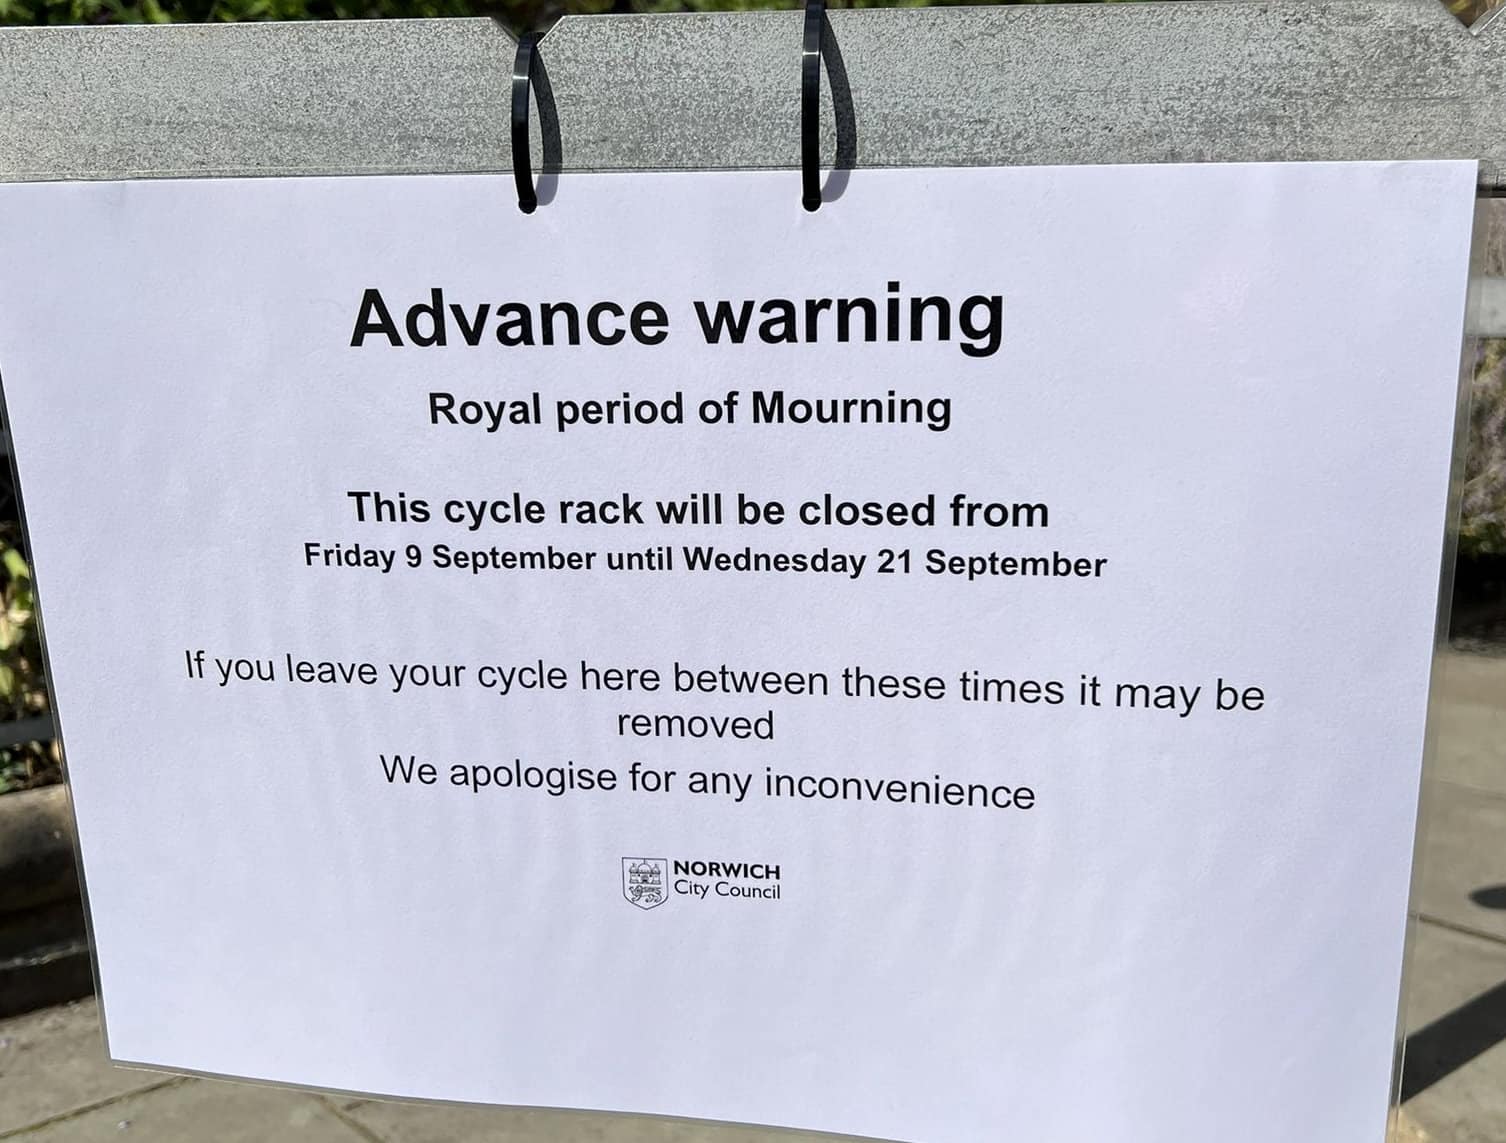 Closure of bike racks for period of royal mourning has left people confused